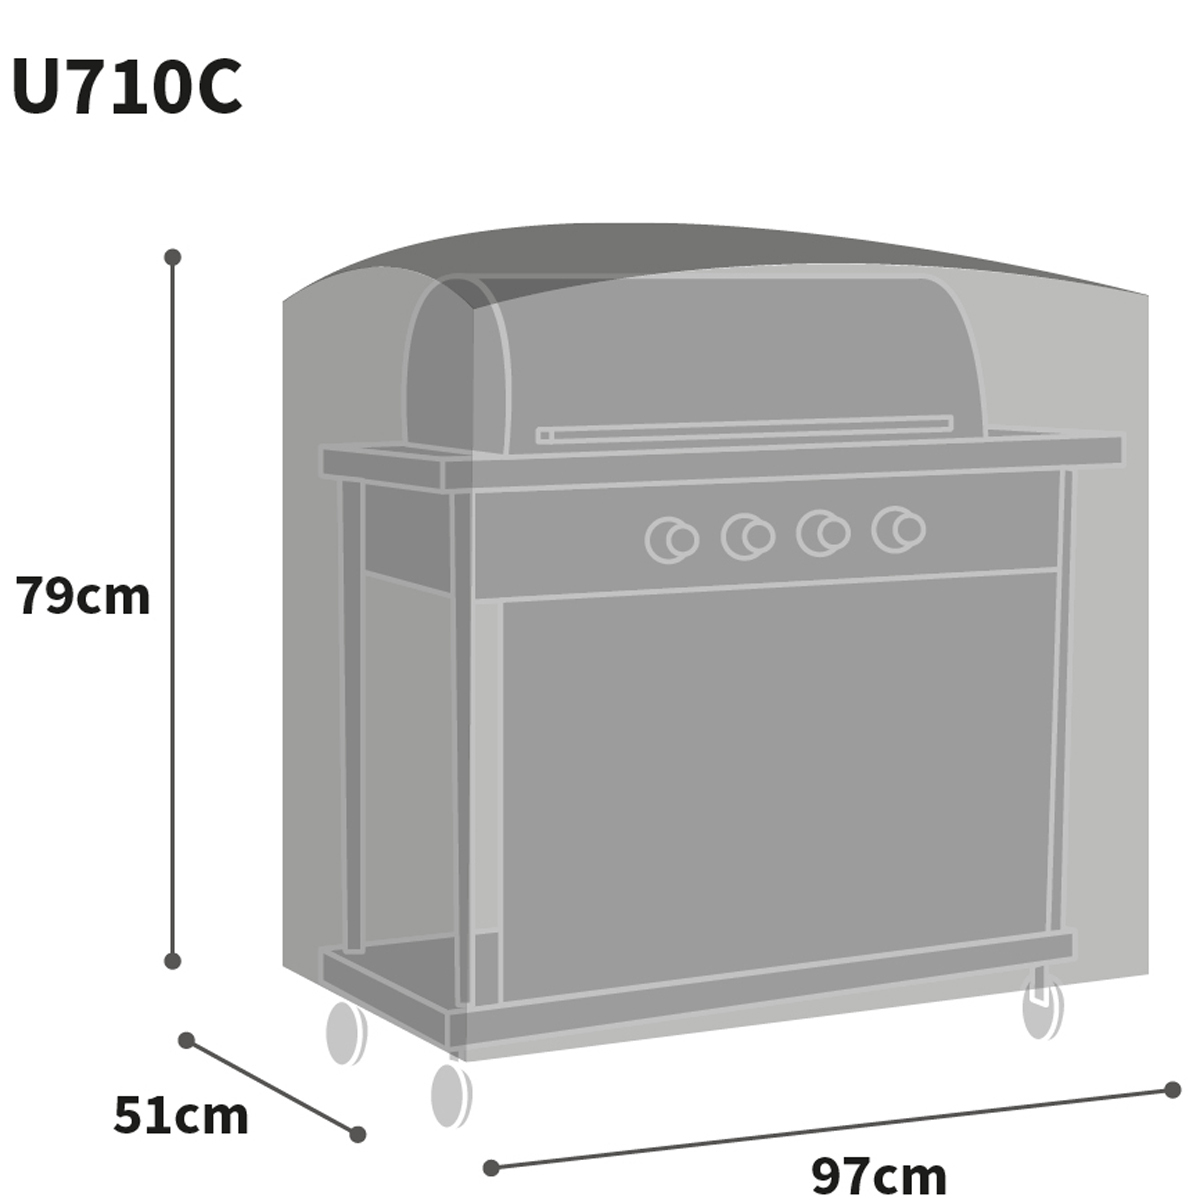 Bosmere Ultimate Protector Trolley BBQ Cover Graphic Size Guide